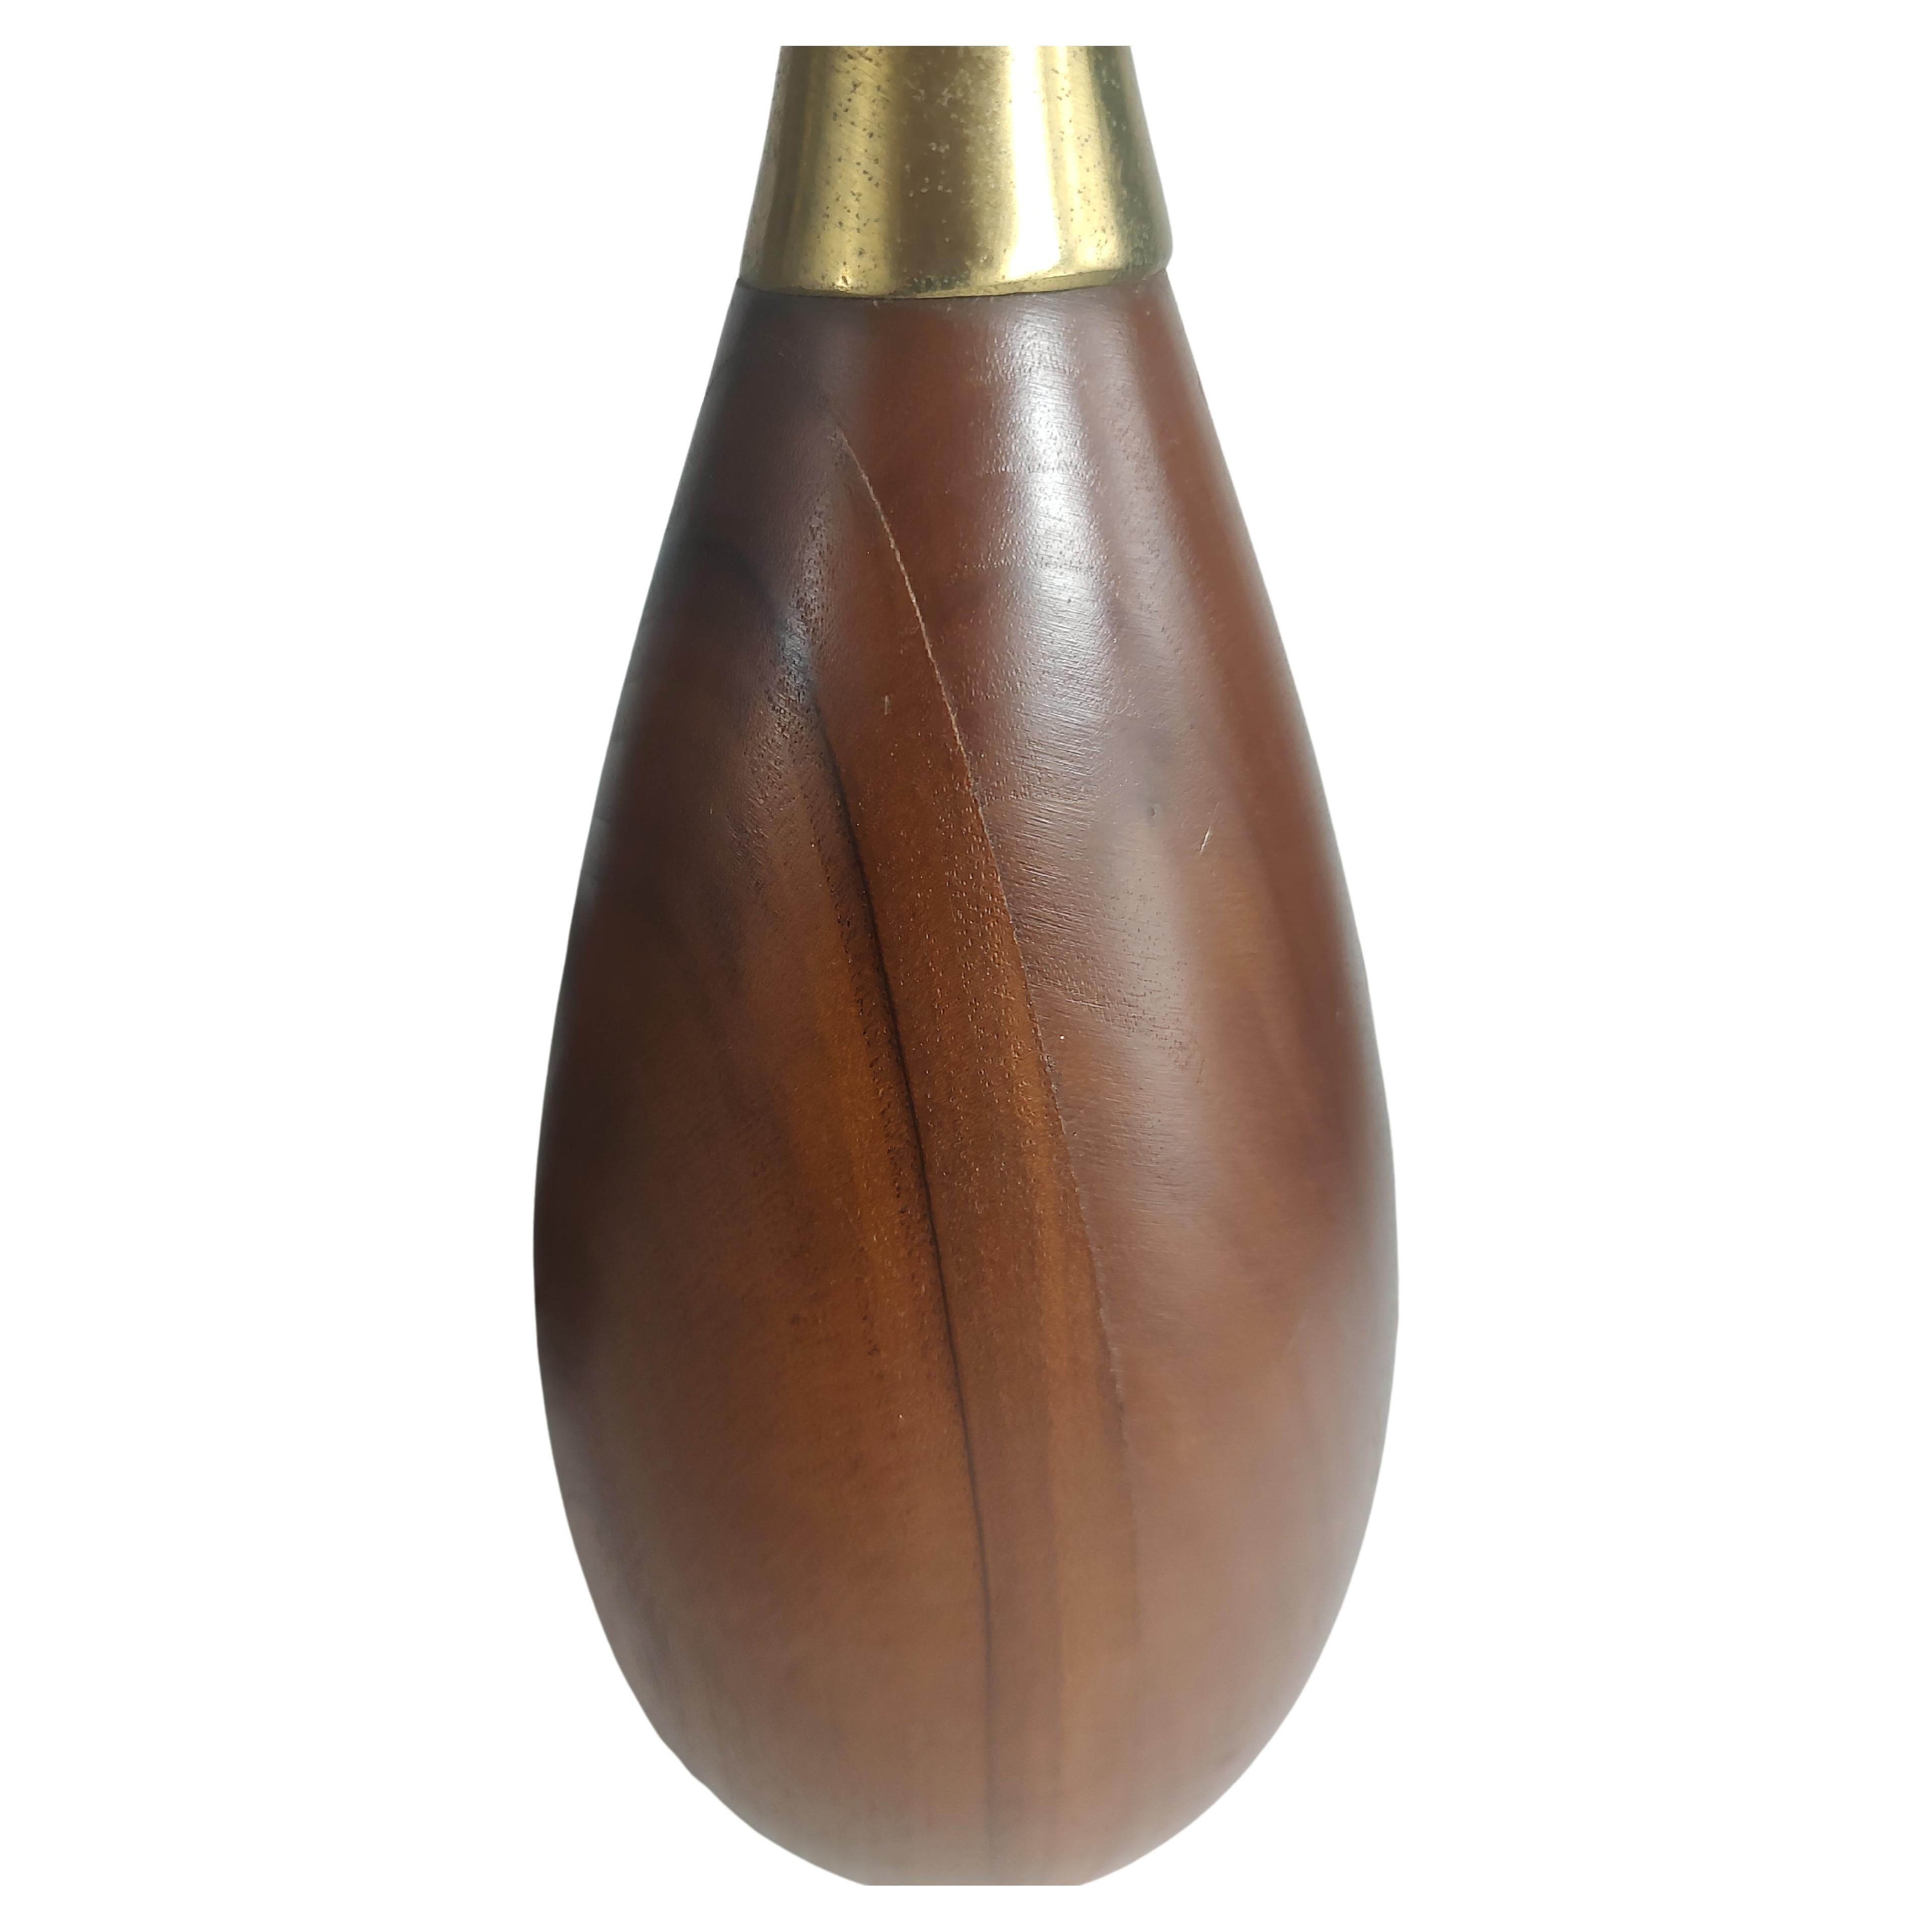 Fabulous pair of mid century walnut & brass table lamps attributed to the laurel lamp co. In the form of Bowling pins. Designer Tony Paul for Westwood Industries. Height is to top of socket 18 x 5 diameter. In excellent vintage condition with